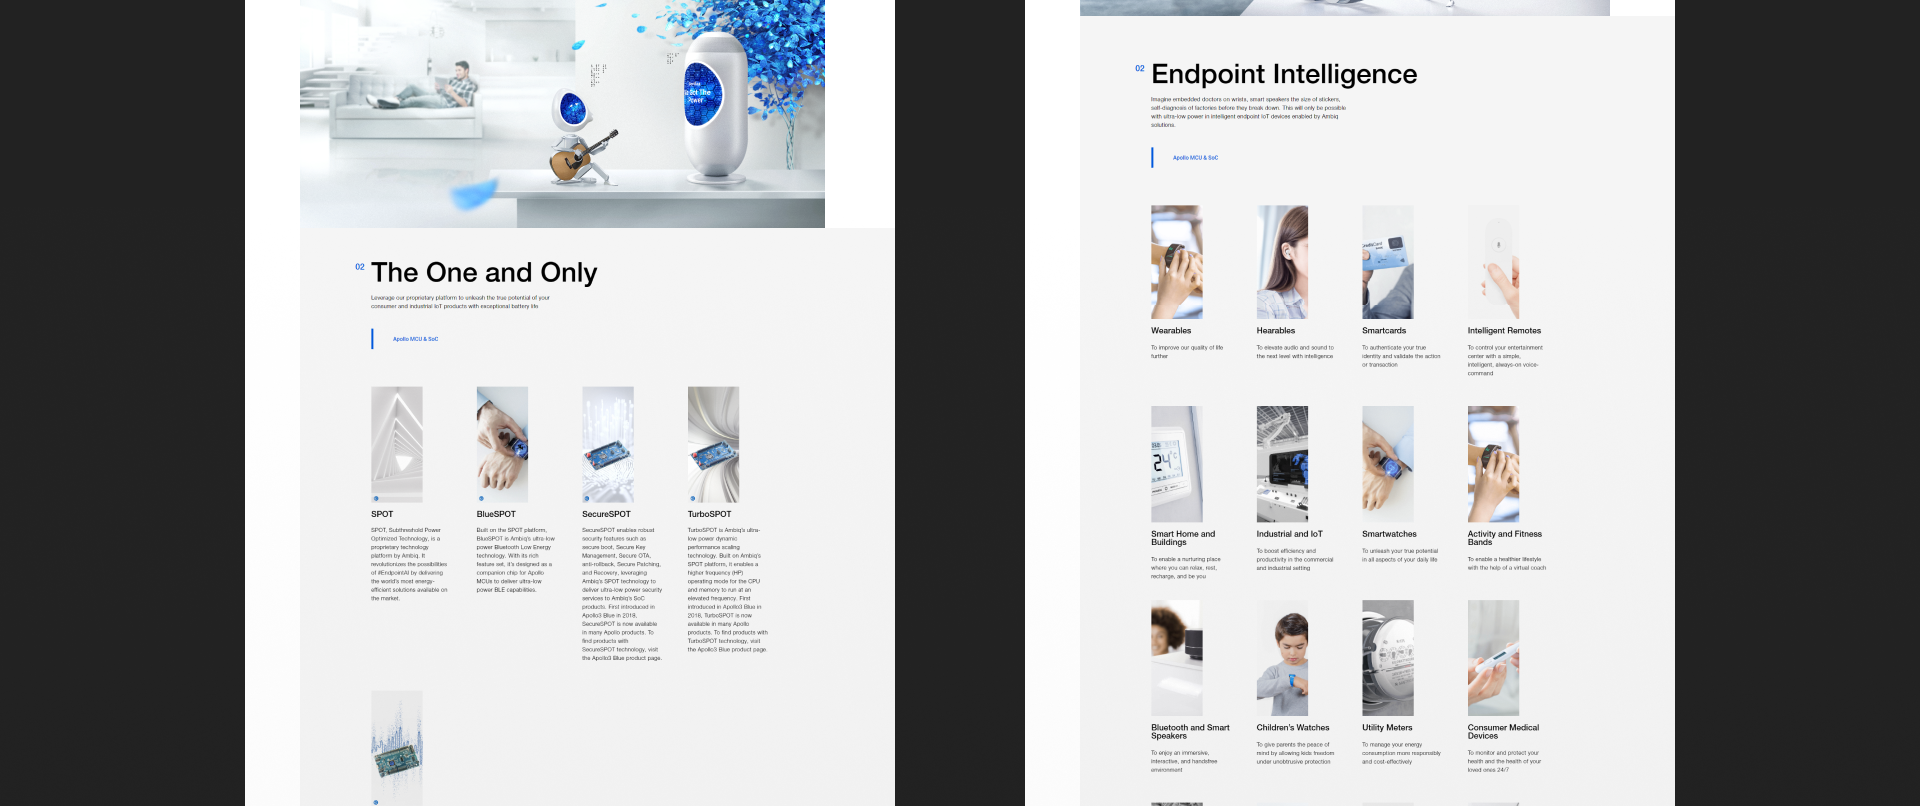 Similar pages design, The one and only and Endpoint Intelligence